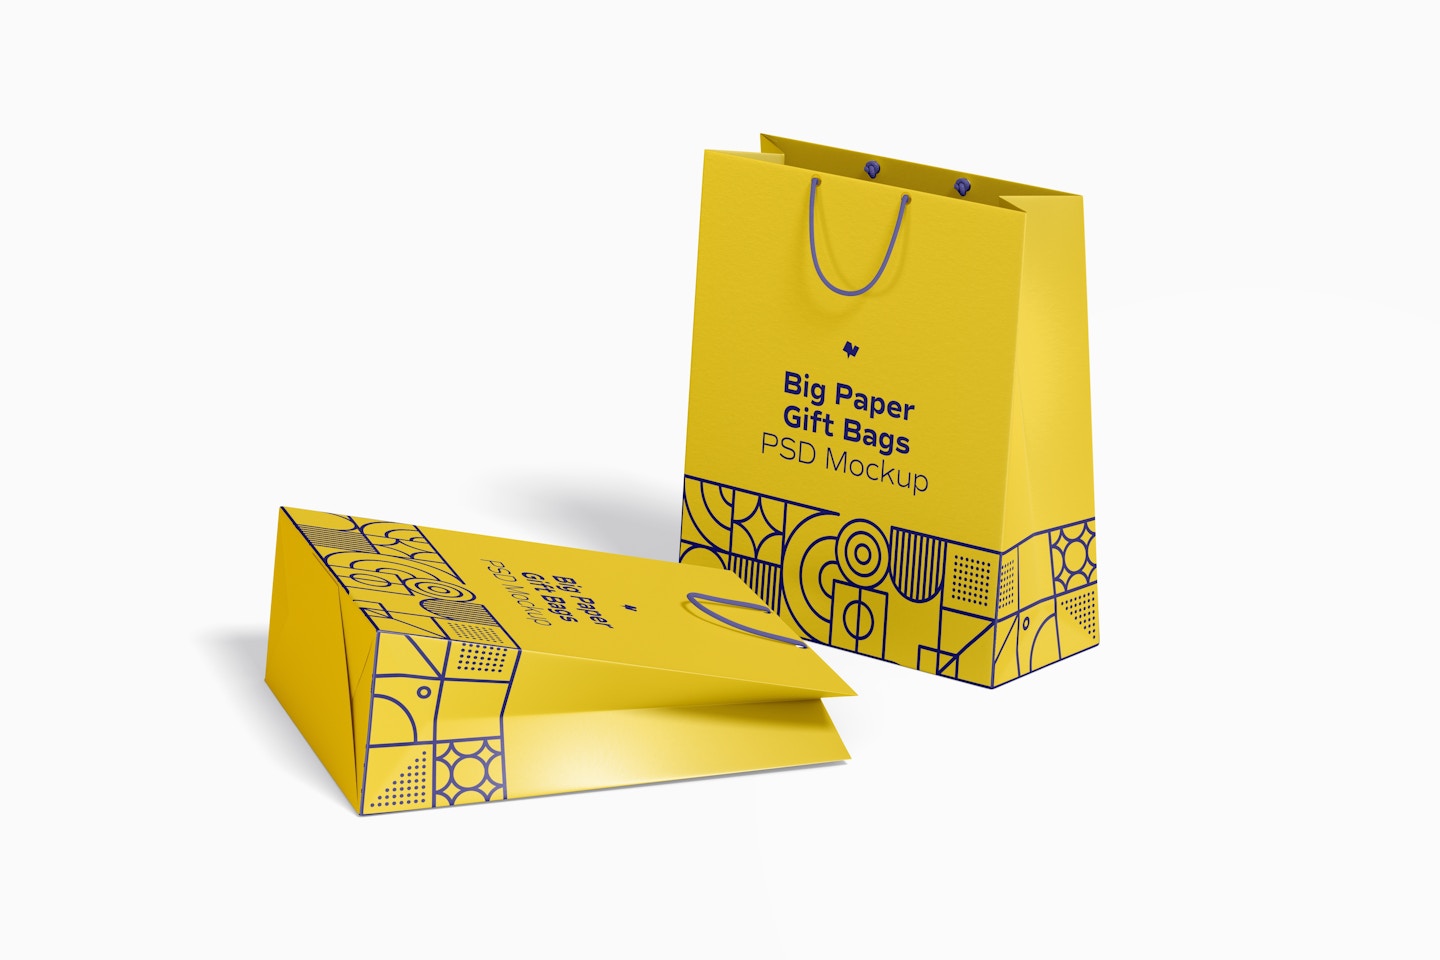 Big Paper Gift Bags With Rope Handle Mockup, Dropped